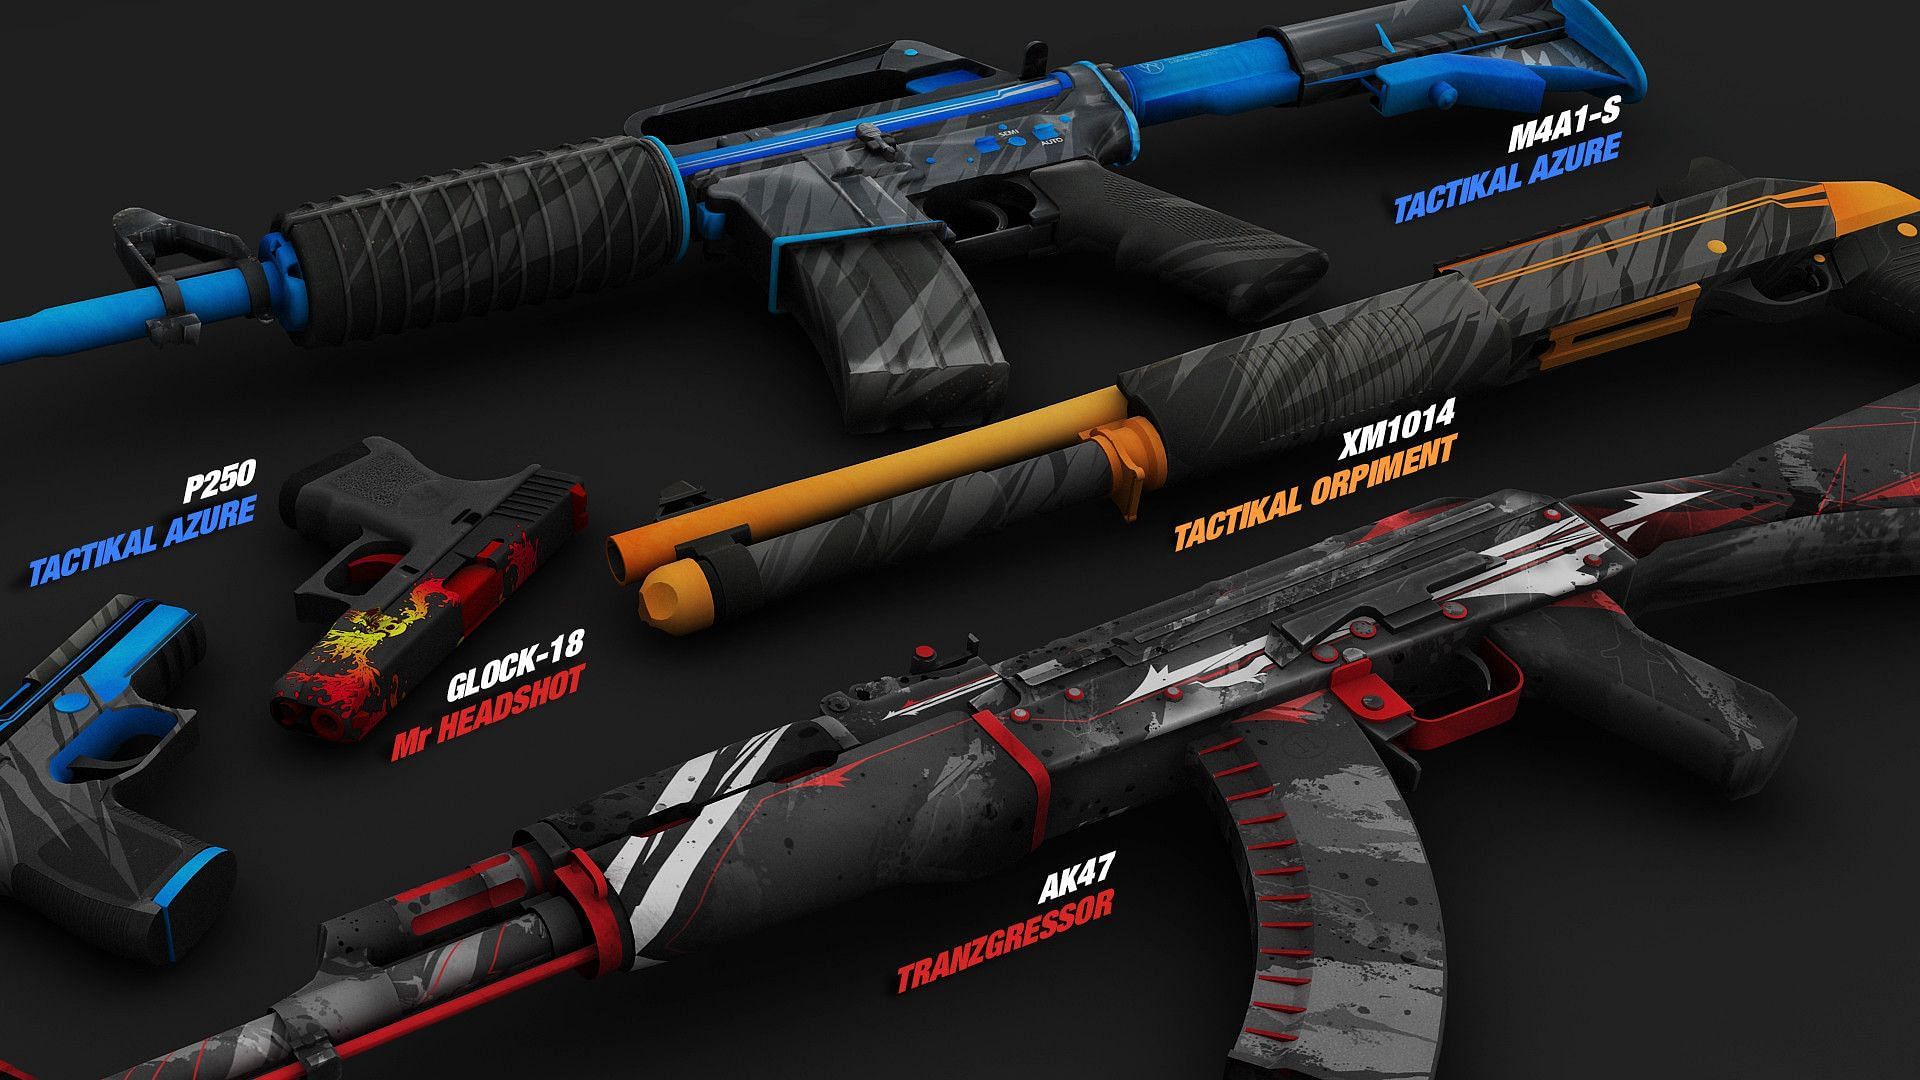 5 deadliest weapons to use in CS:GO